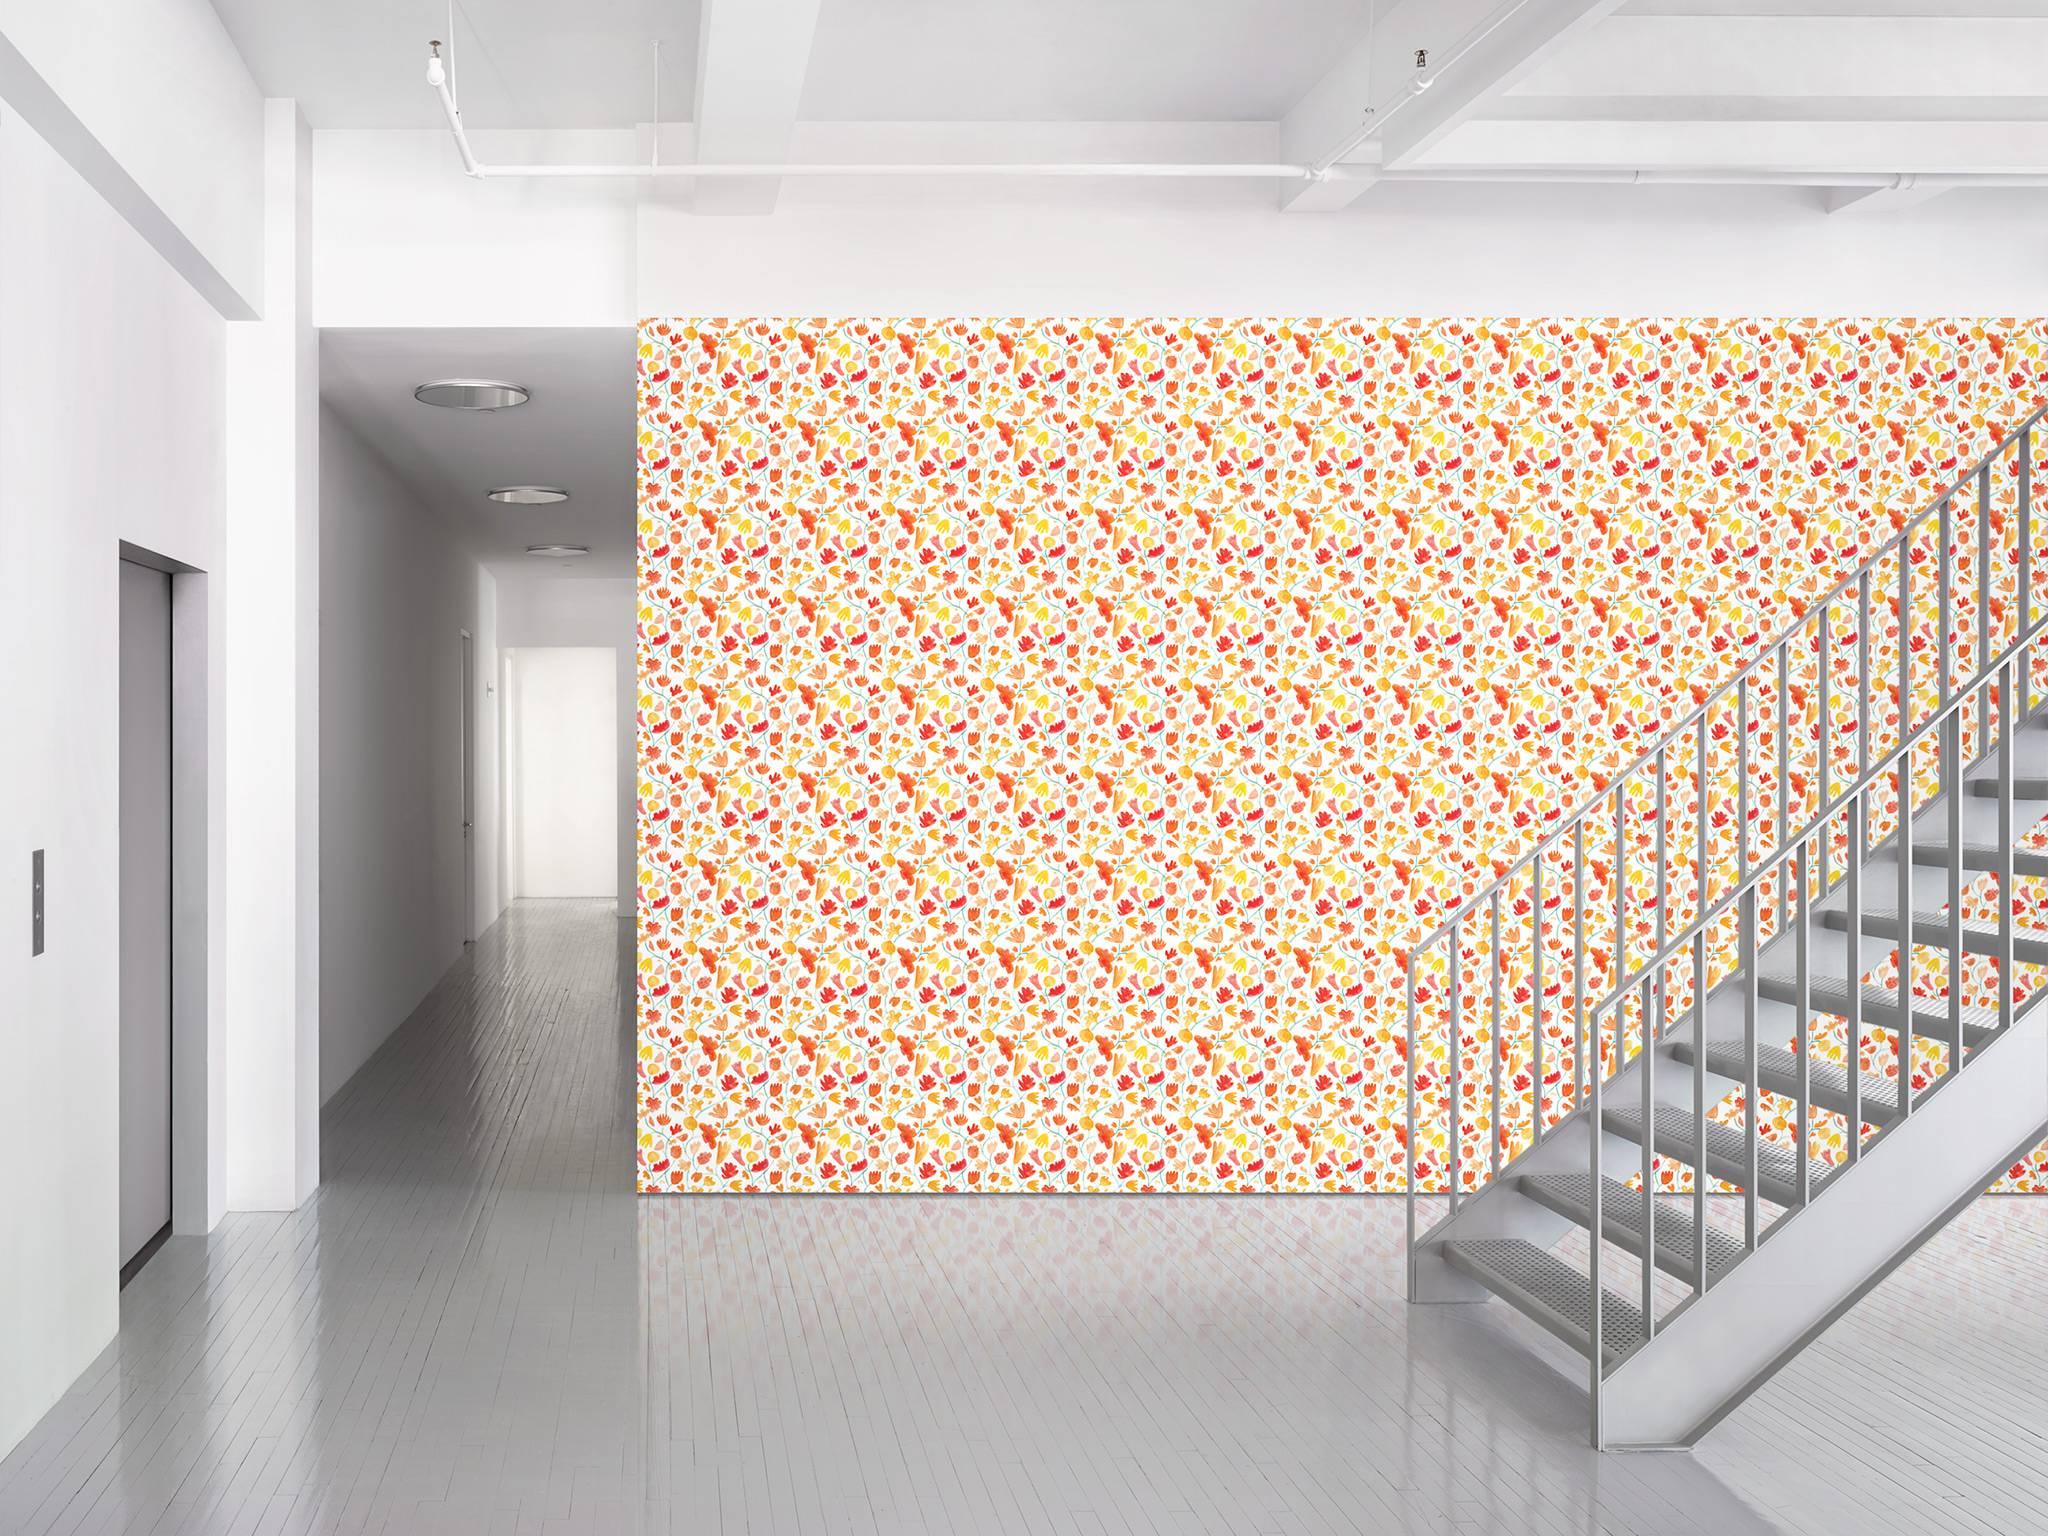 Maharam Serpentine Galleries Wallpaper
Watercolor Flowers by SANAA
001

SANAA is a Tokyo-based architecture firm founded by Ryue Nishizawa and Kazuyo Sejima. Their work is characterized by an immaterial quality that is achieved through openness and